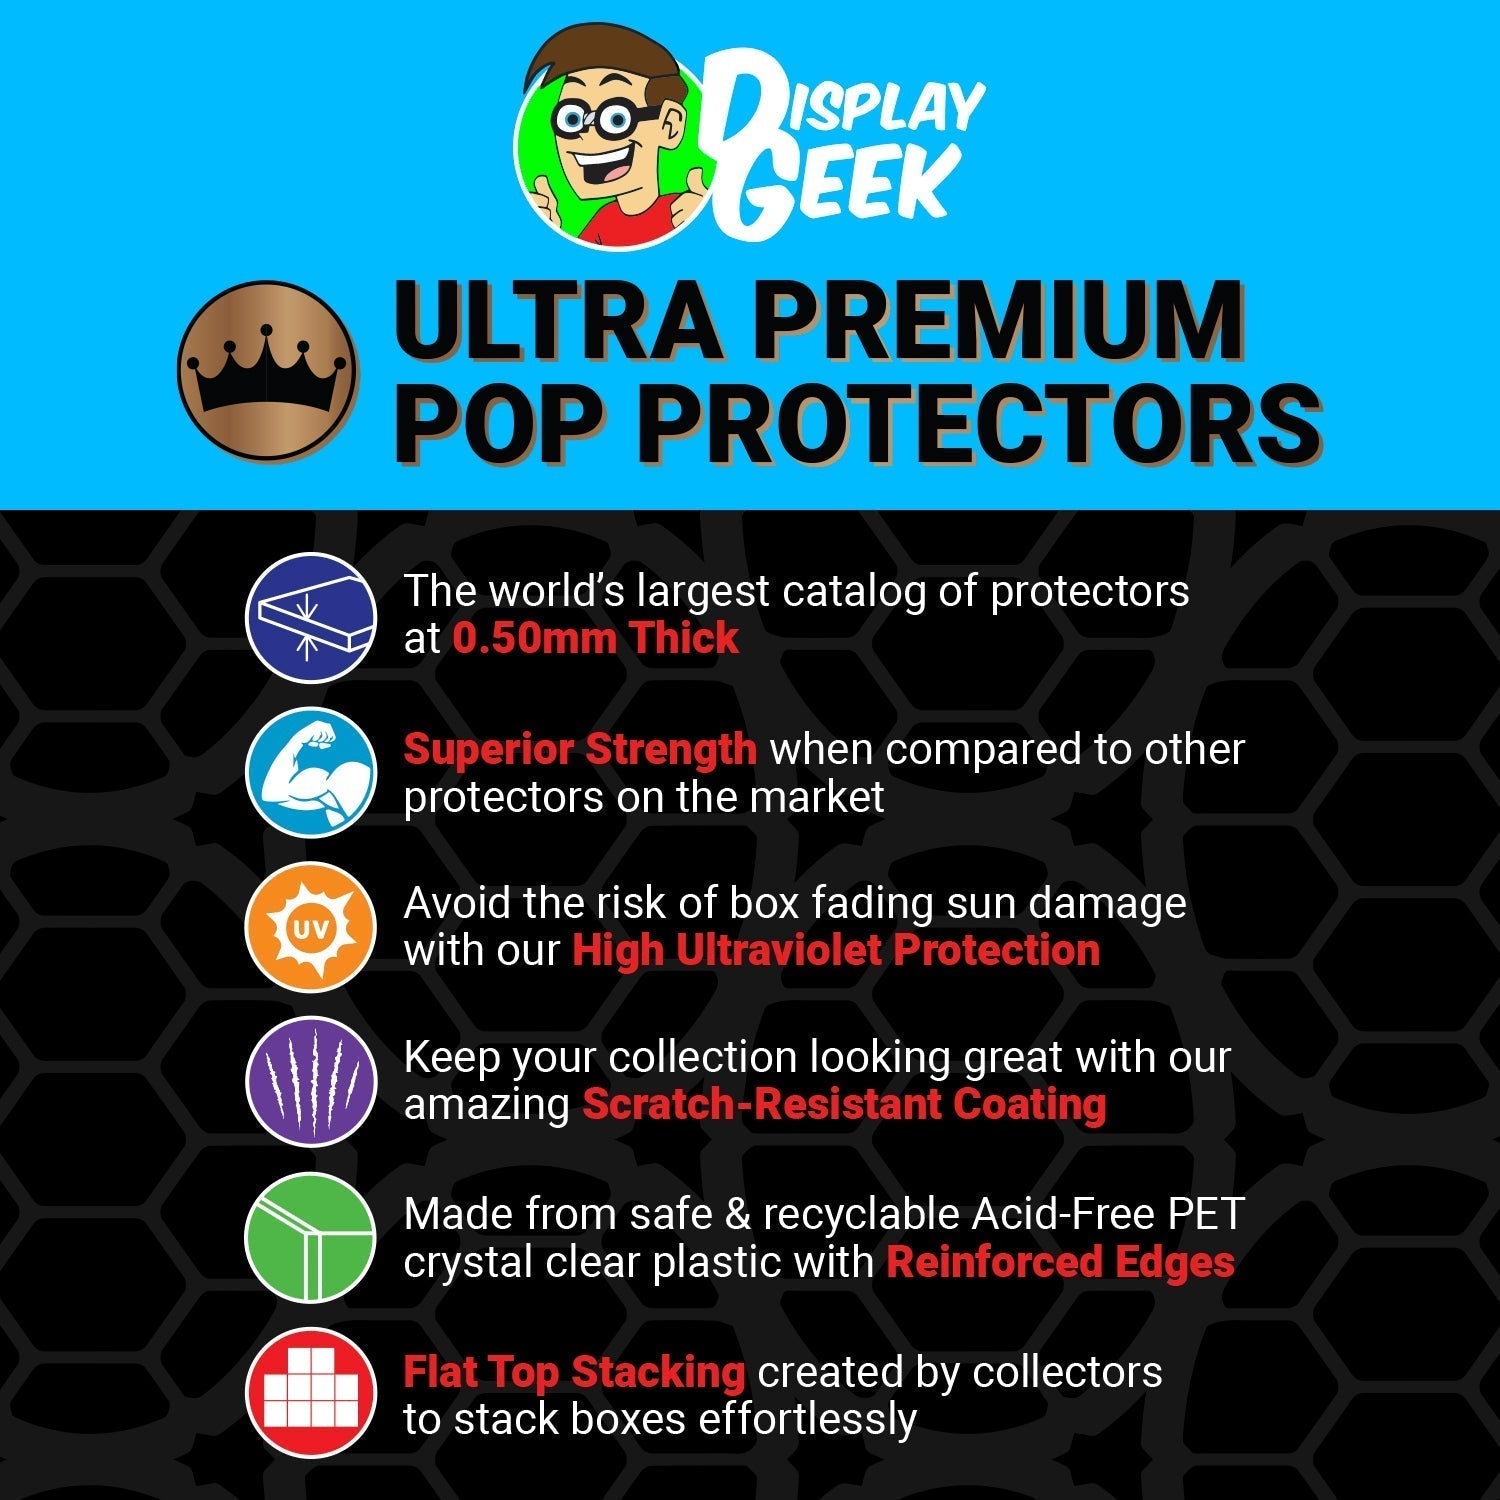 Pop Protector for Cyndi Lauper #32 Funko Pop Albums - PPG Pop Protector Guide Search Created by Display Geek